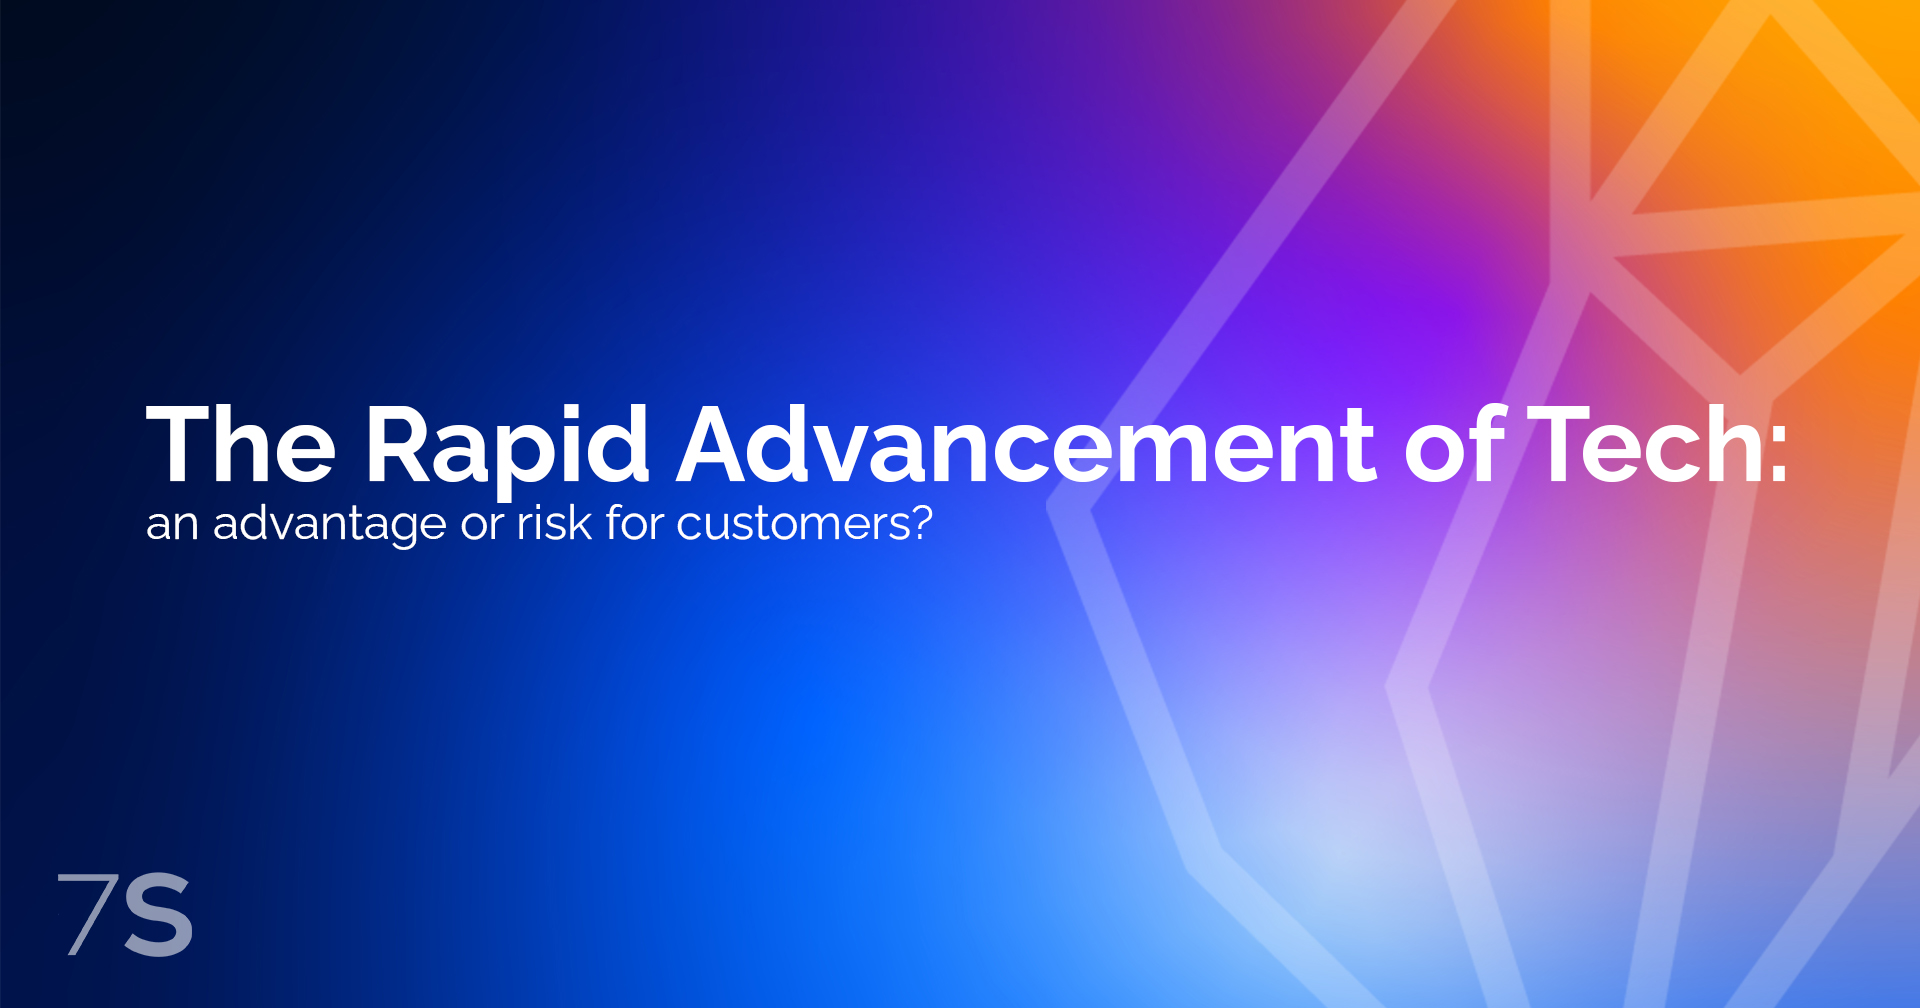 The Rapid Advancement of Tech: an advantage or risk for customers?